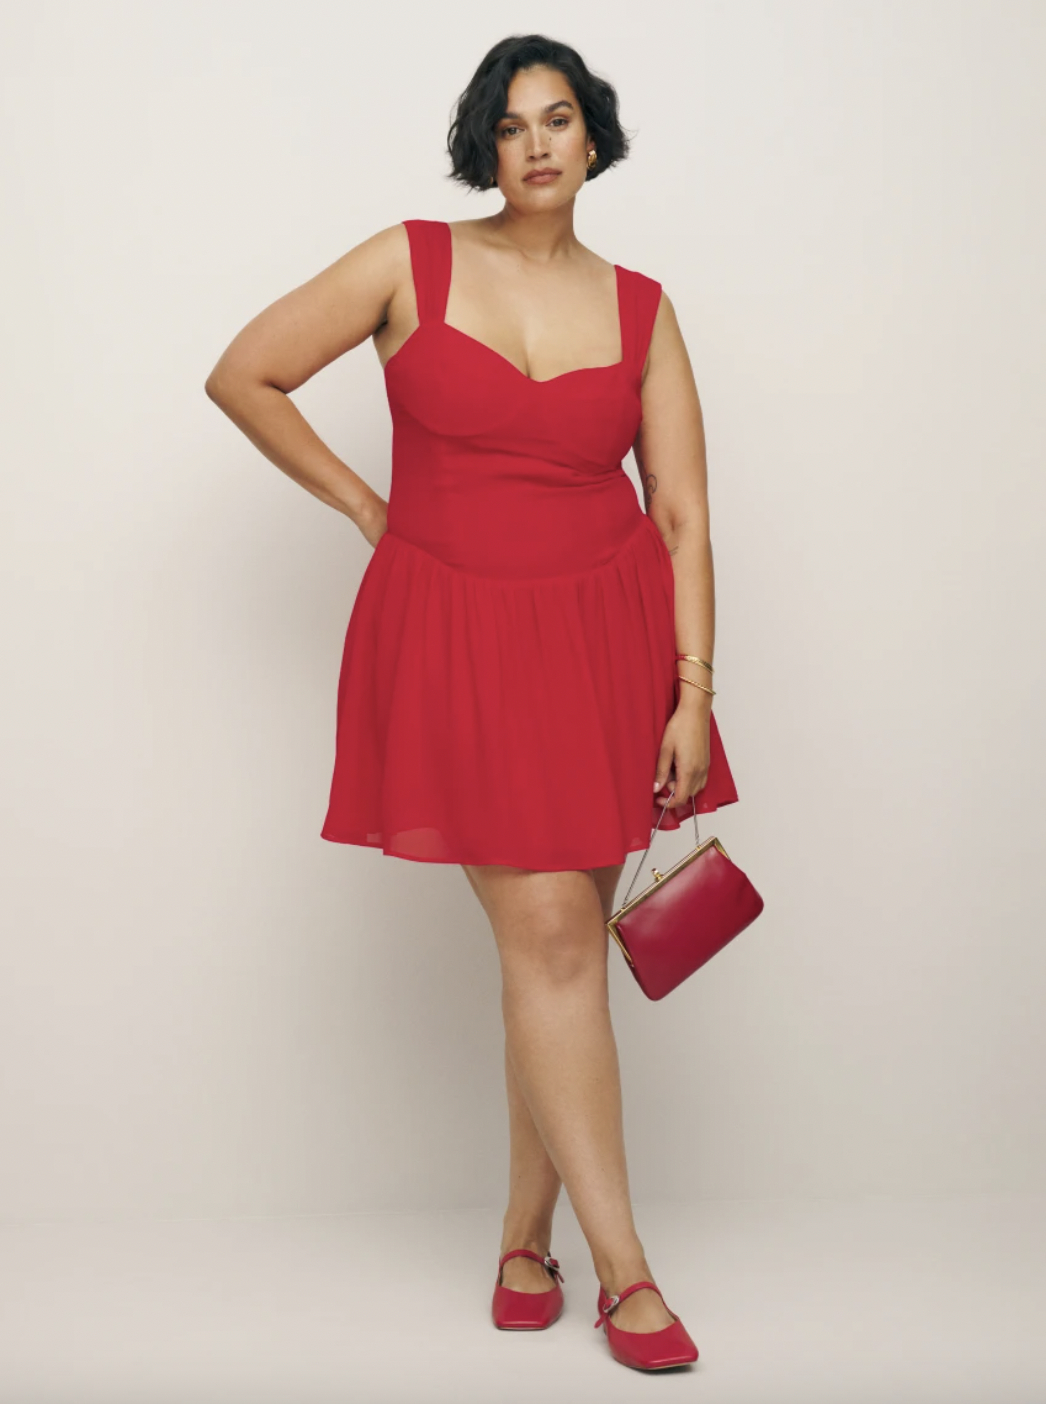 model in a sleeveless red dress with matching shoes and handbag, posing confidently